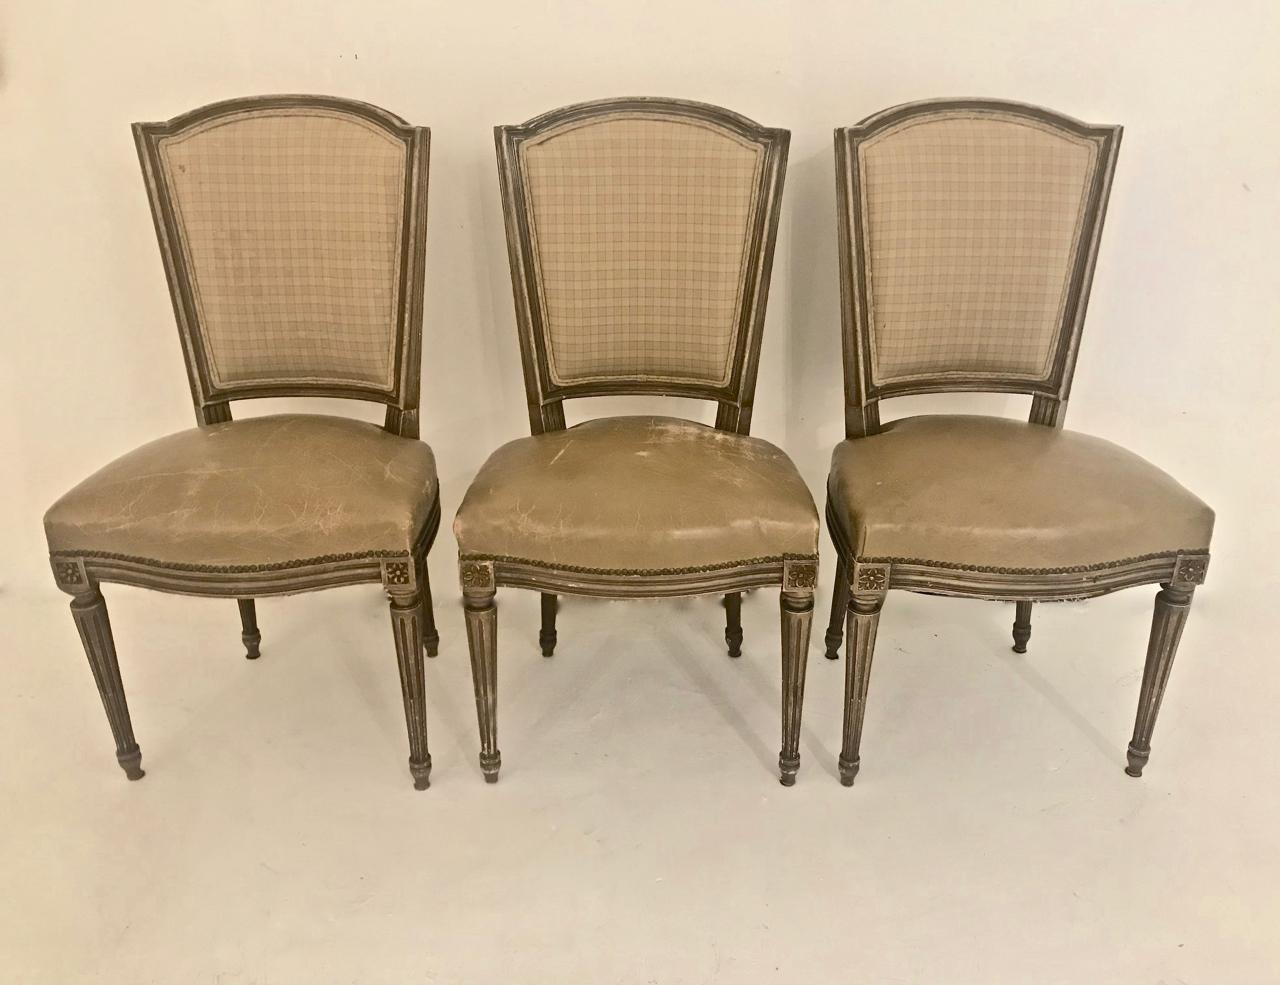 This is a highly decorative set of 6 French Louis XVI-style dining chairs that date to the first half of the twentieth century. The chairs retain their vintage caramel-colored French fabric backs that coordinate perfectly with the beautifully